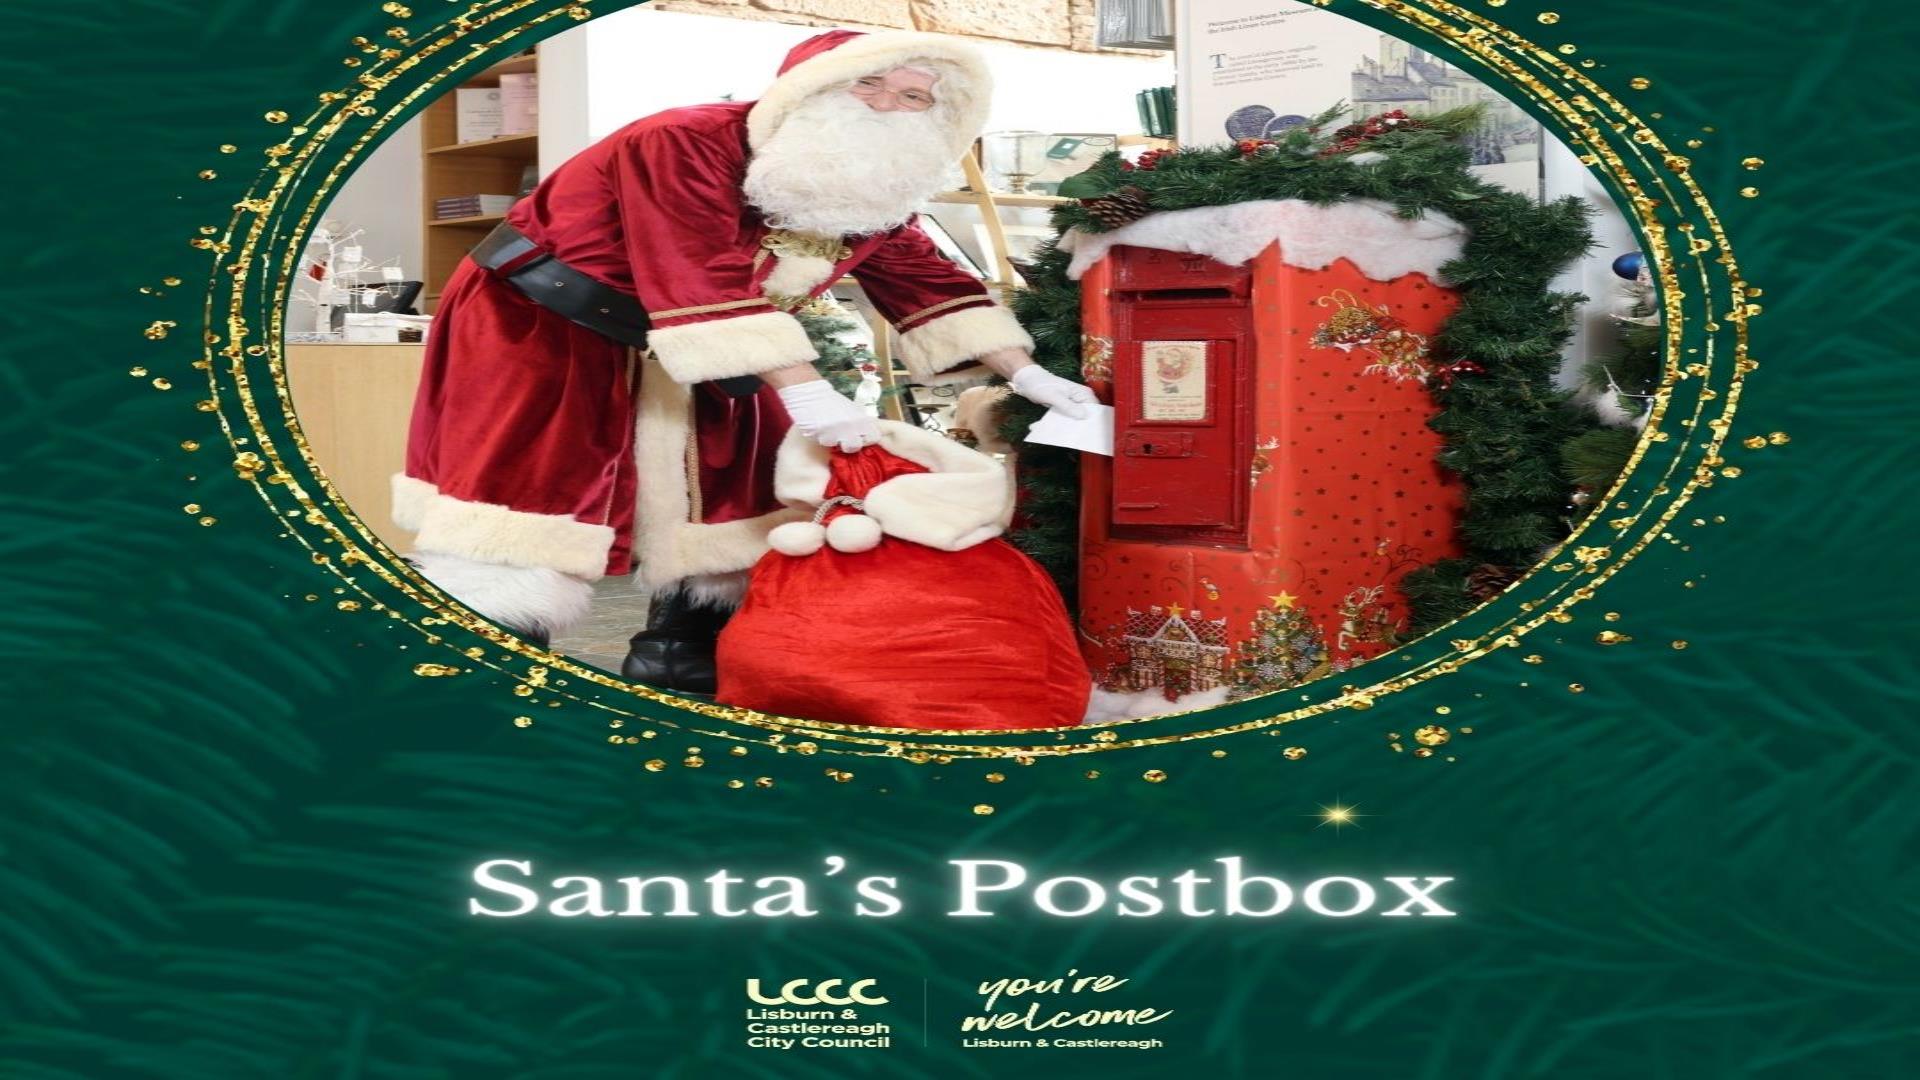 Image is of Santa Claus emptying the post box into his Christmas sack